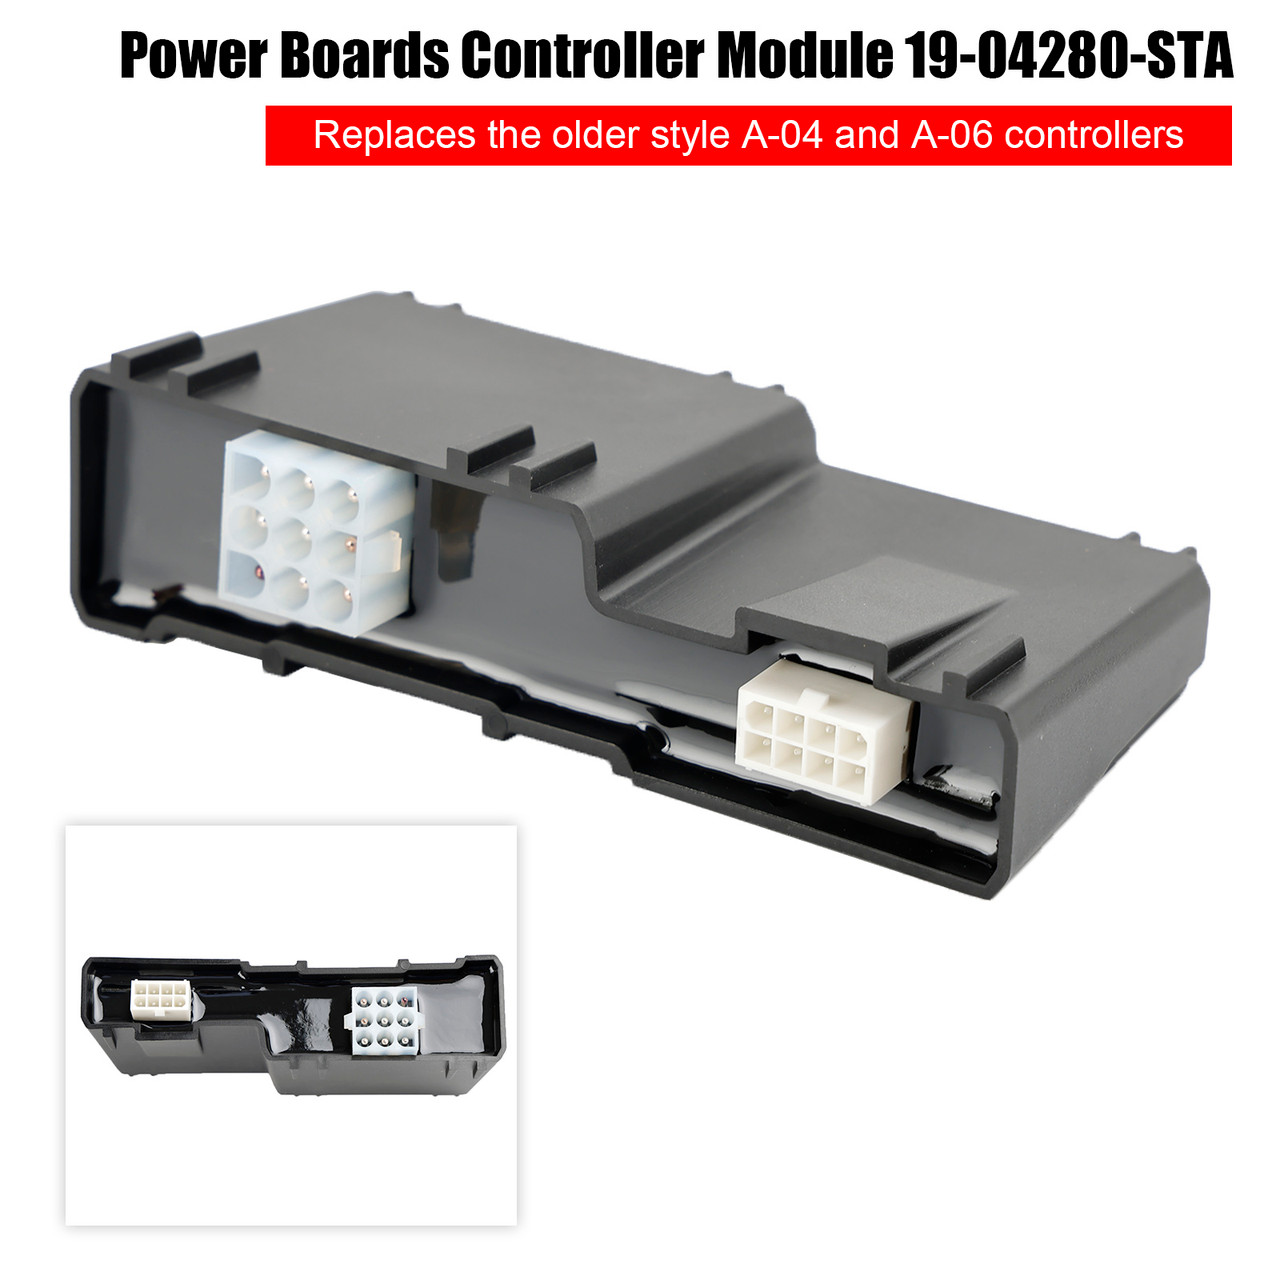 Power Boards Controller Module 19-04280-STA Replace For A-04 and A-06 controllers